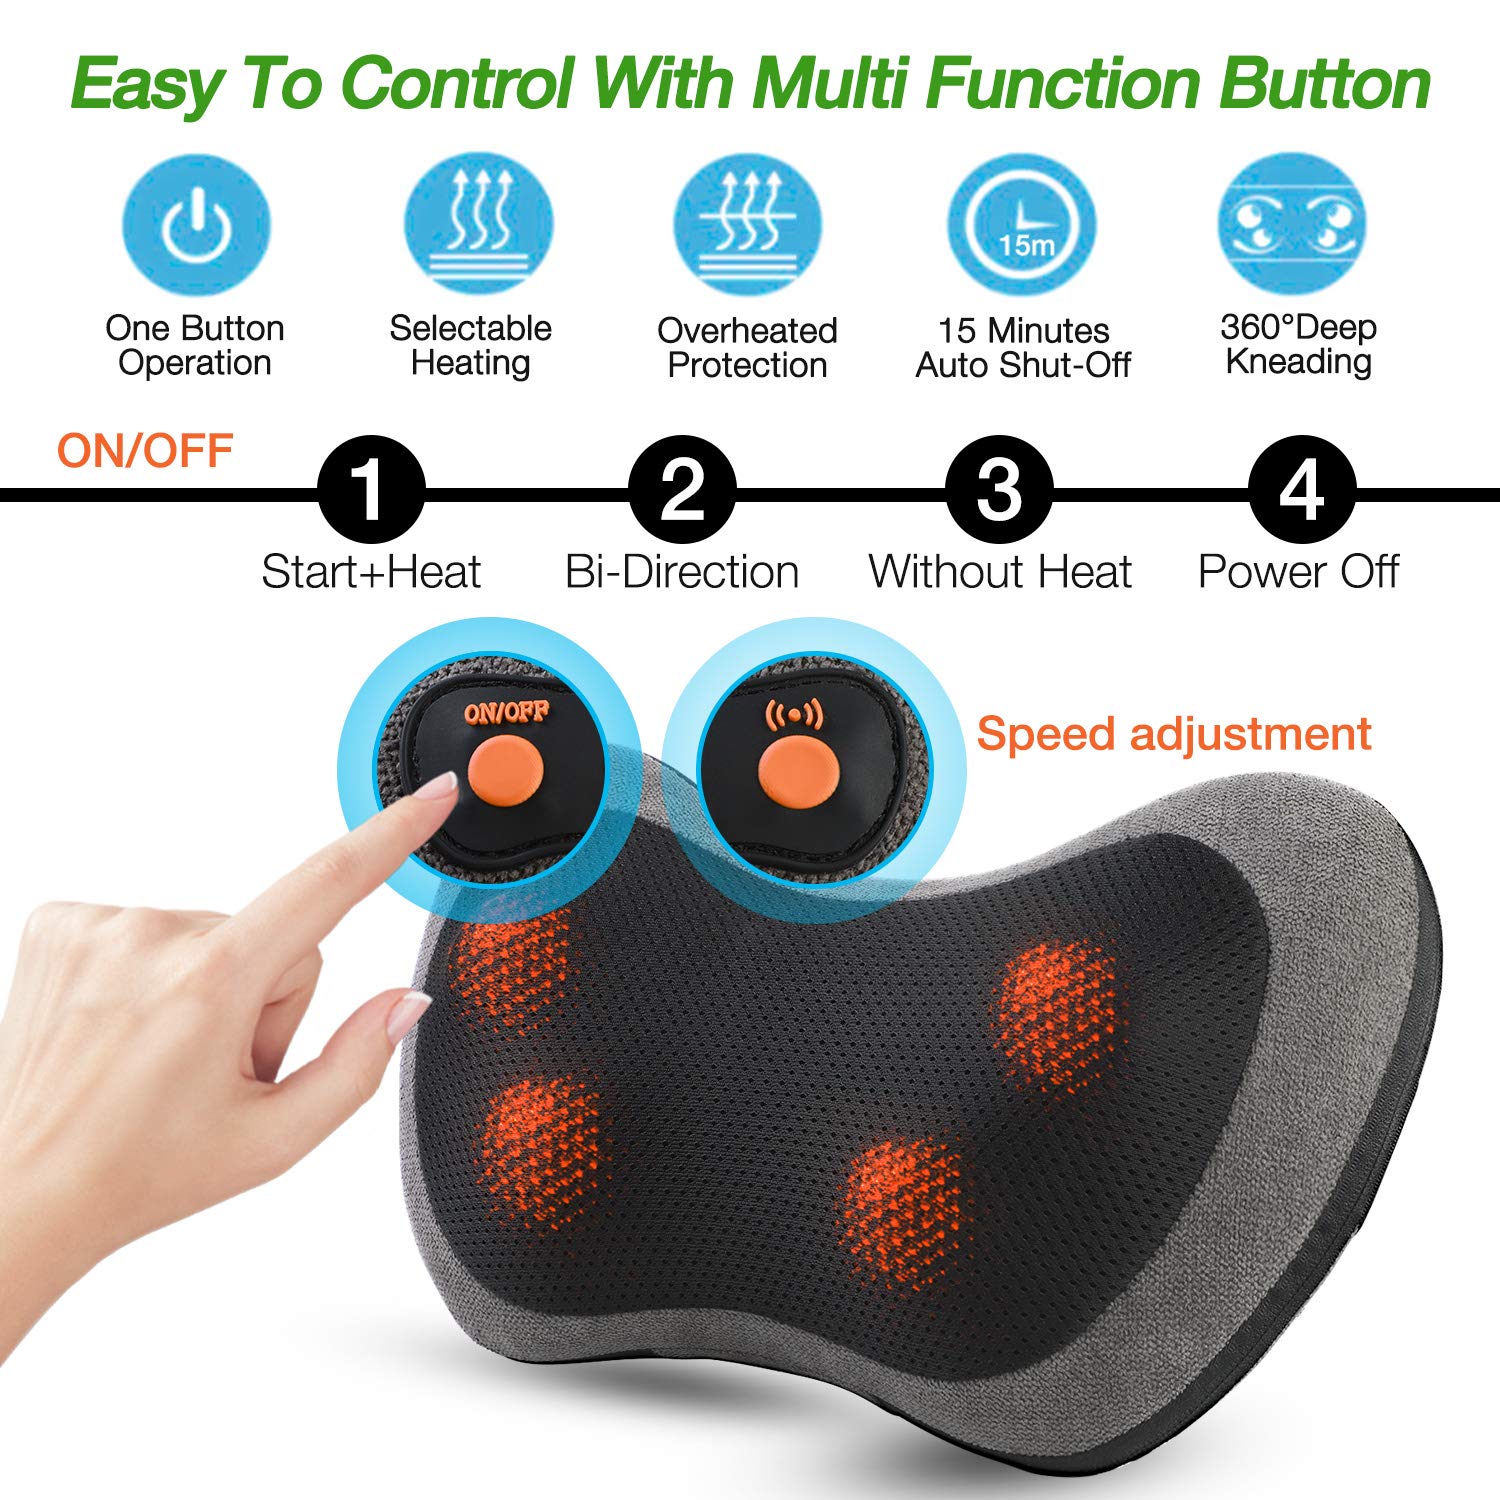 Shiatsu Neck Back Massager Kneading Massage Pillow With Heat for Back, Neck, Lower Back and Shoulder Massager with 4 Heated Rollers Dust Proof Cover Storage Bag for Stress Relax at Home Office and Car